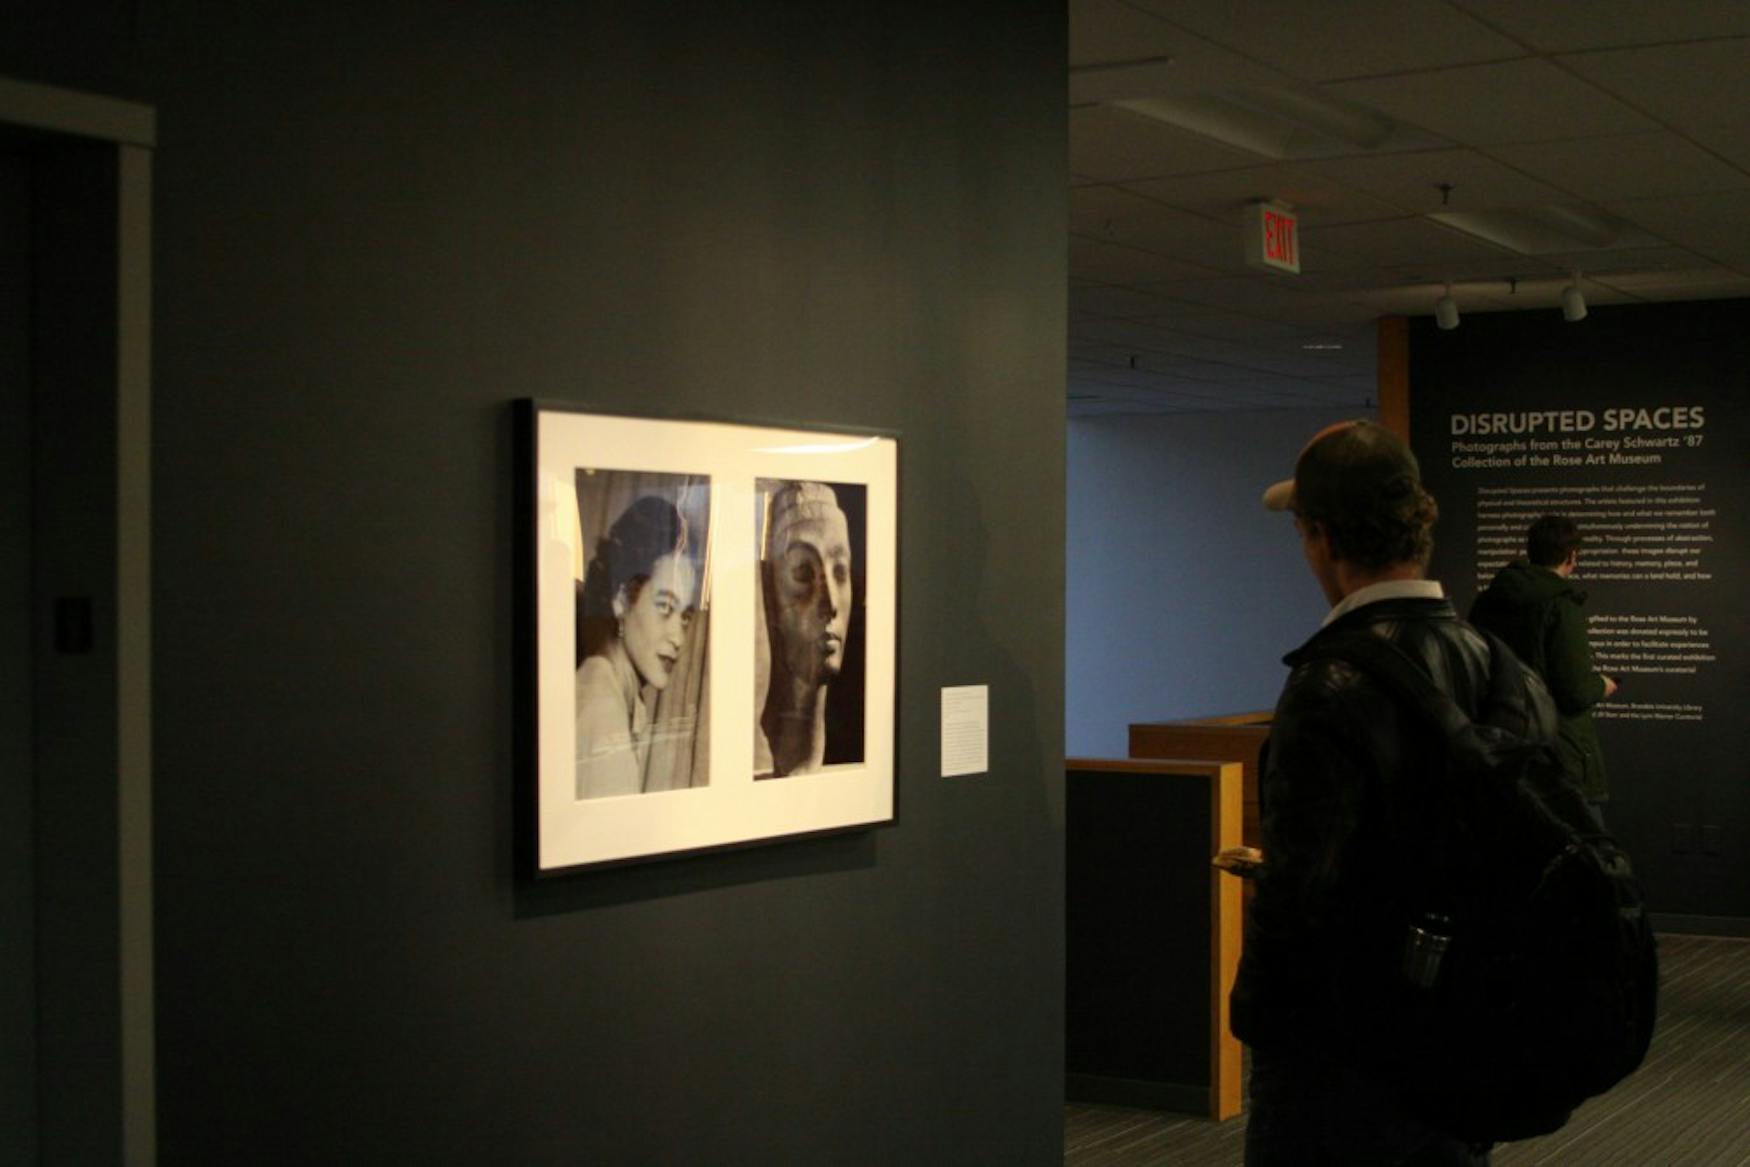 ABOUT FACE: A student looks on at photographs of two women’s faces. The series implies a narrative between the two black and white photos.